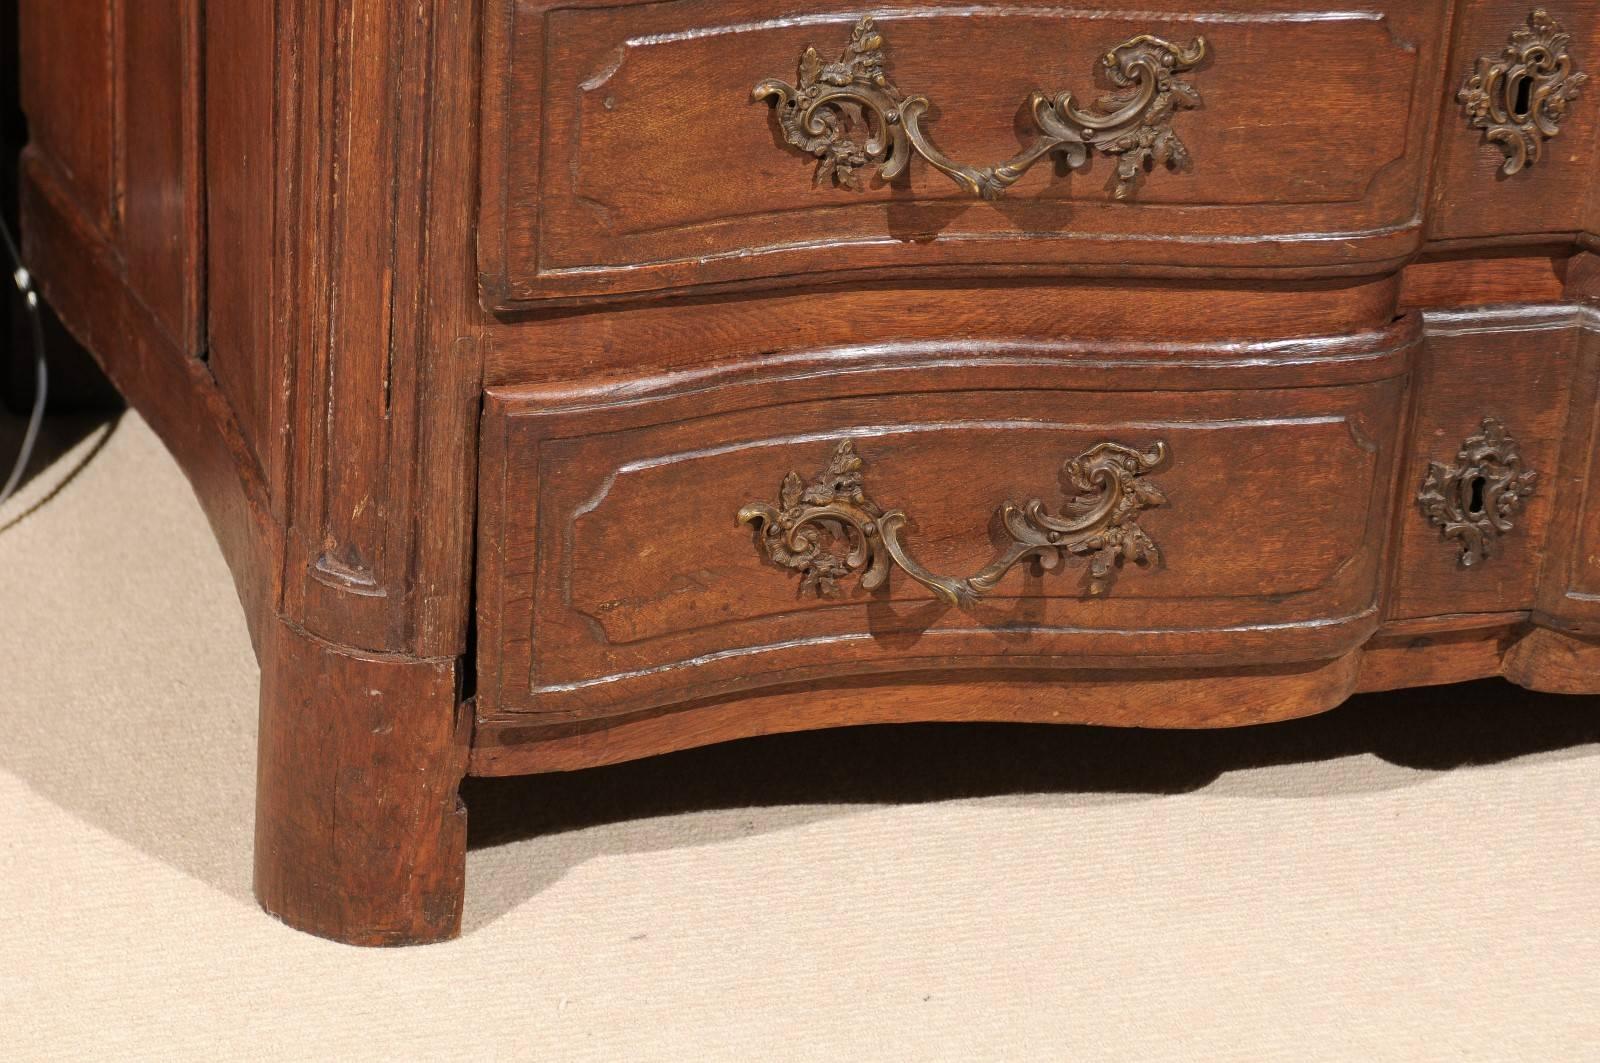 French Walnut Commode or Chest, Carved Drawers, Original Hardware, circa 1800 For Sale 4